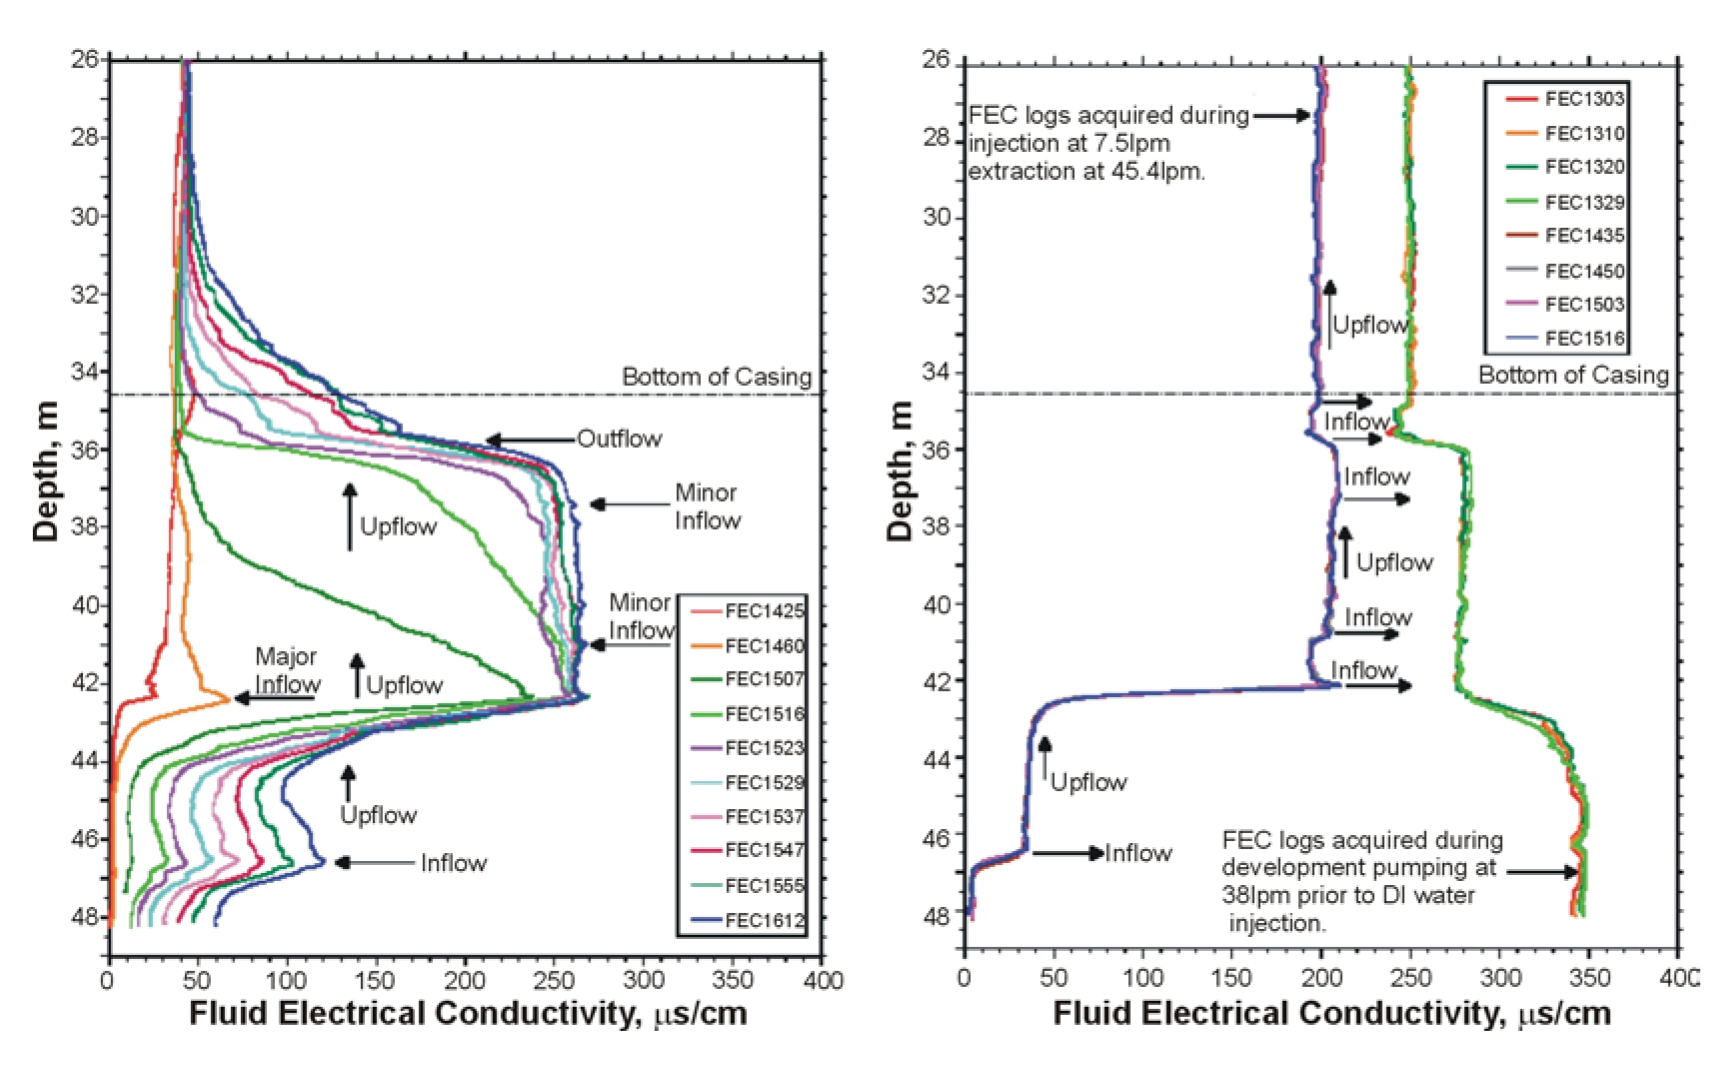 Examples of ambient flow characterization and 10 gpm production test, respectively.  (Layne Christensen, Colog)